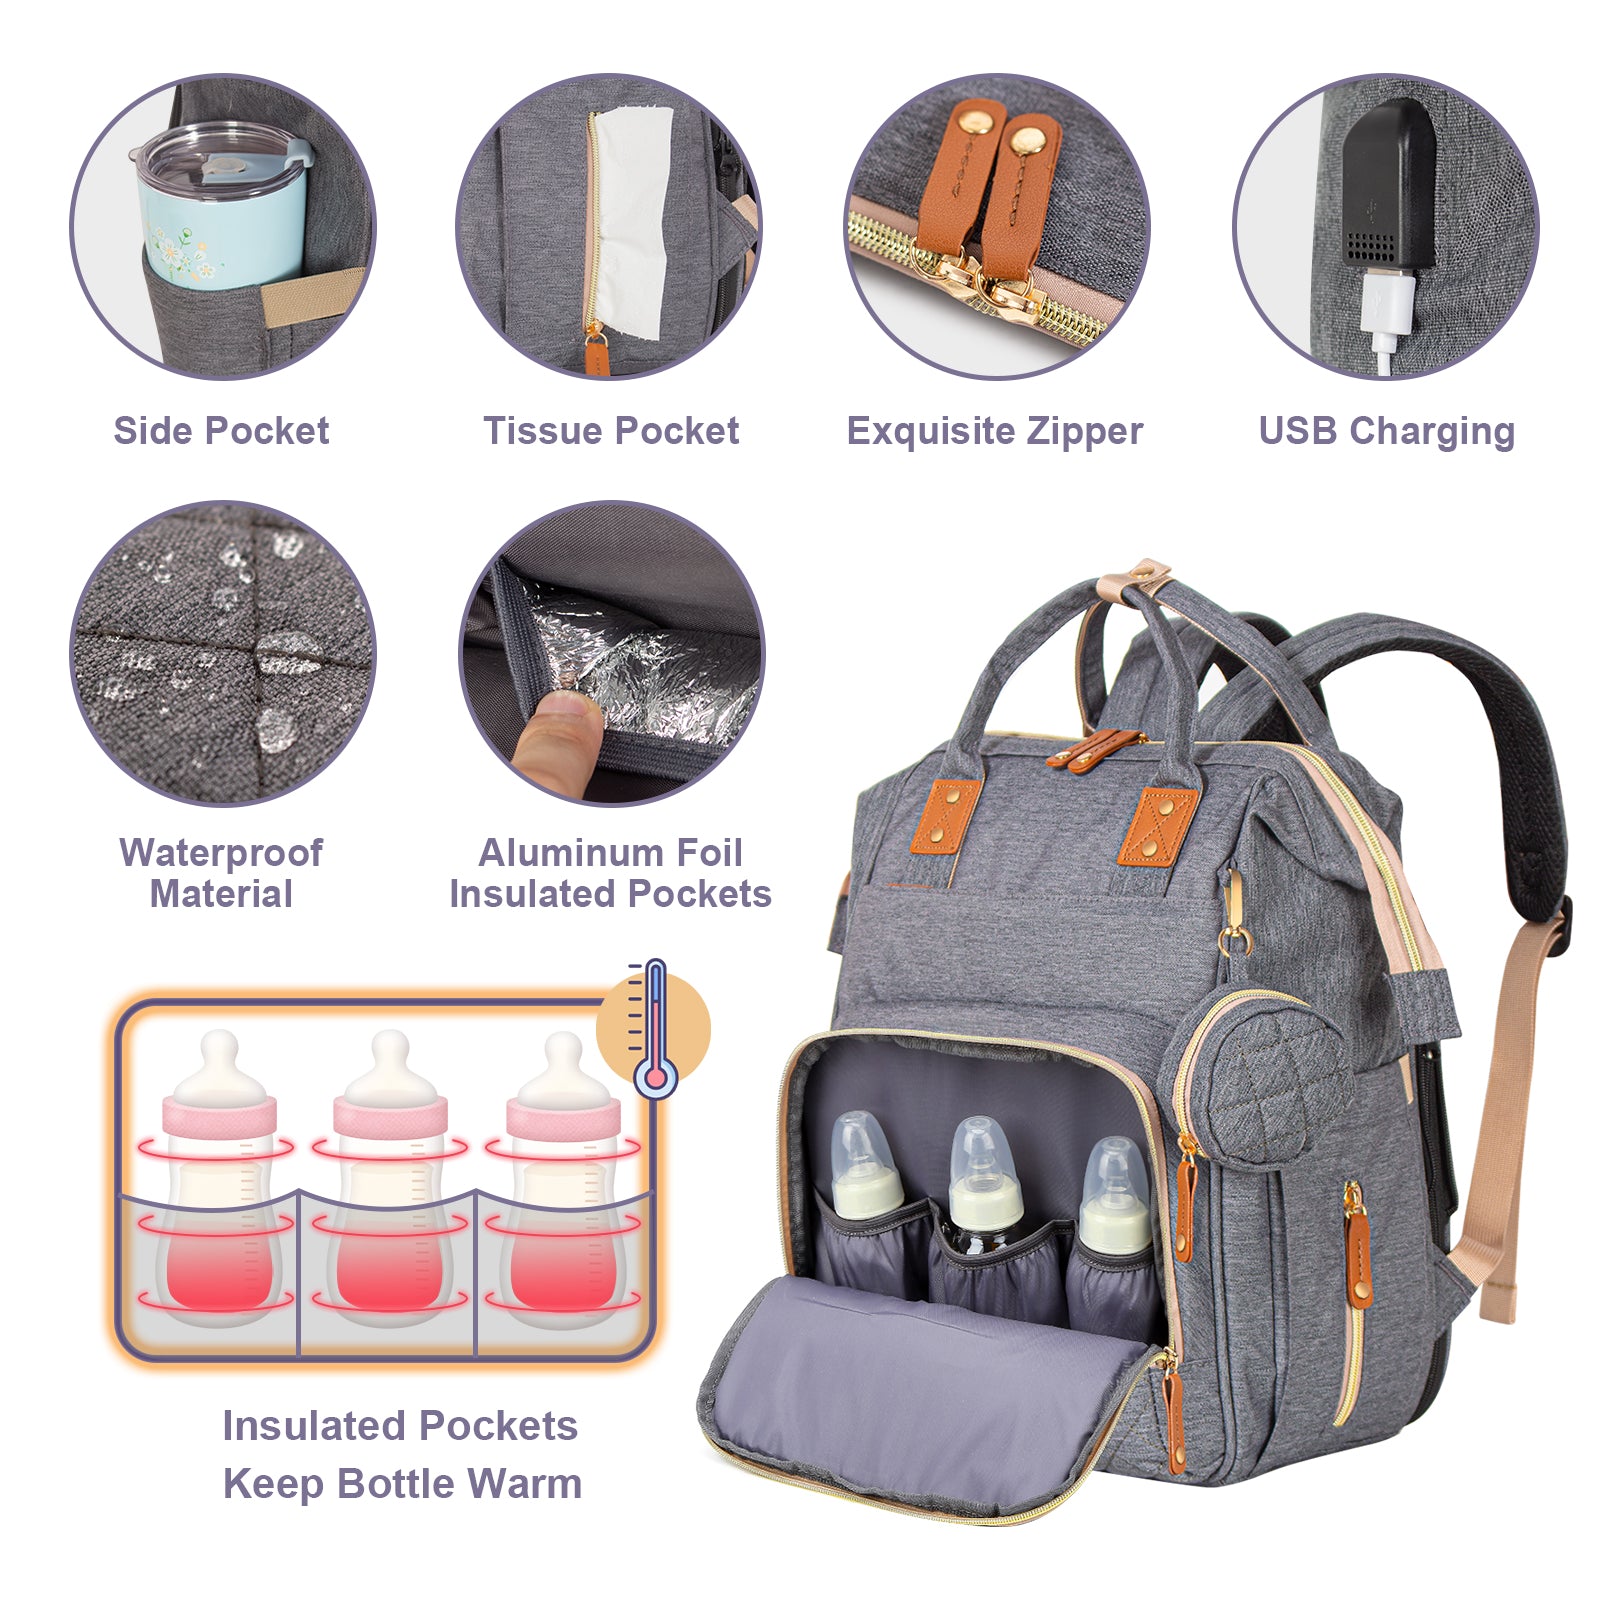 Diaper-Backpack-with-Foldable-Baby-Bed-Large-Capacity-Waterproof-Portable-Multifunction-Diaper-Bag-with-Mat-Pacifier-Holder-and-USB-Port-Dark-Grey-Diaper-Backpack-with-Foldable-Baby-Bed-Dark-Gray